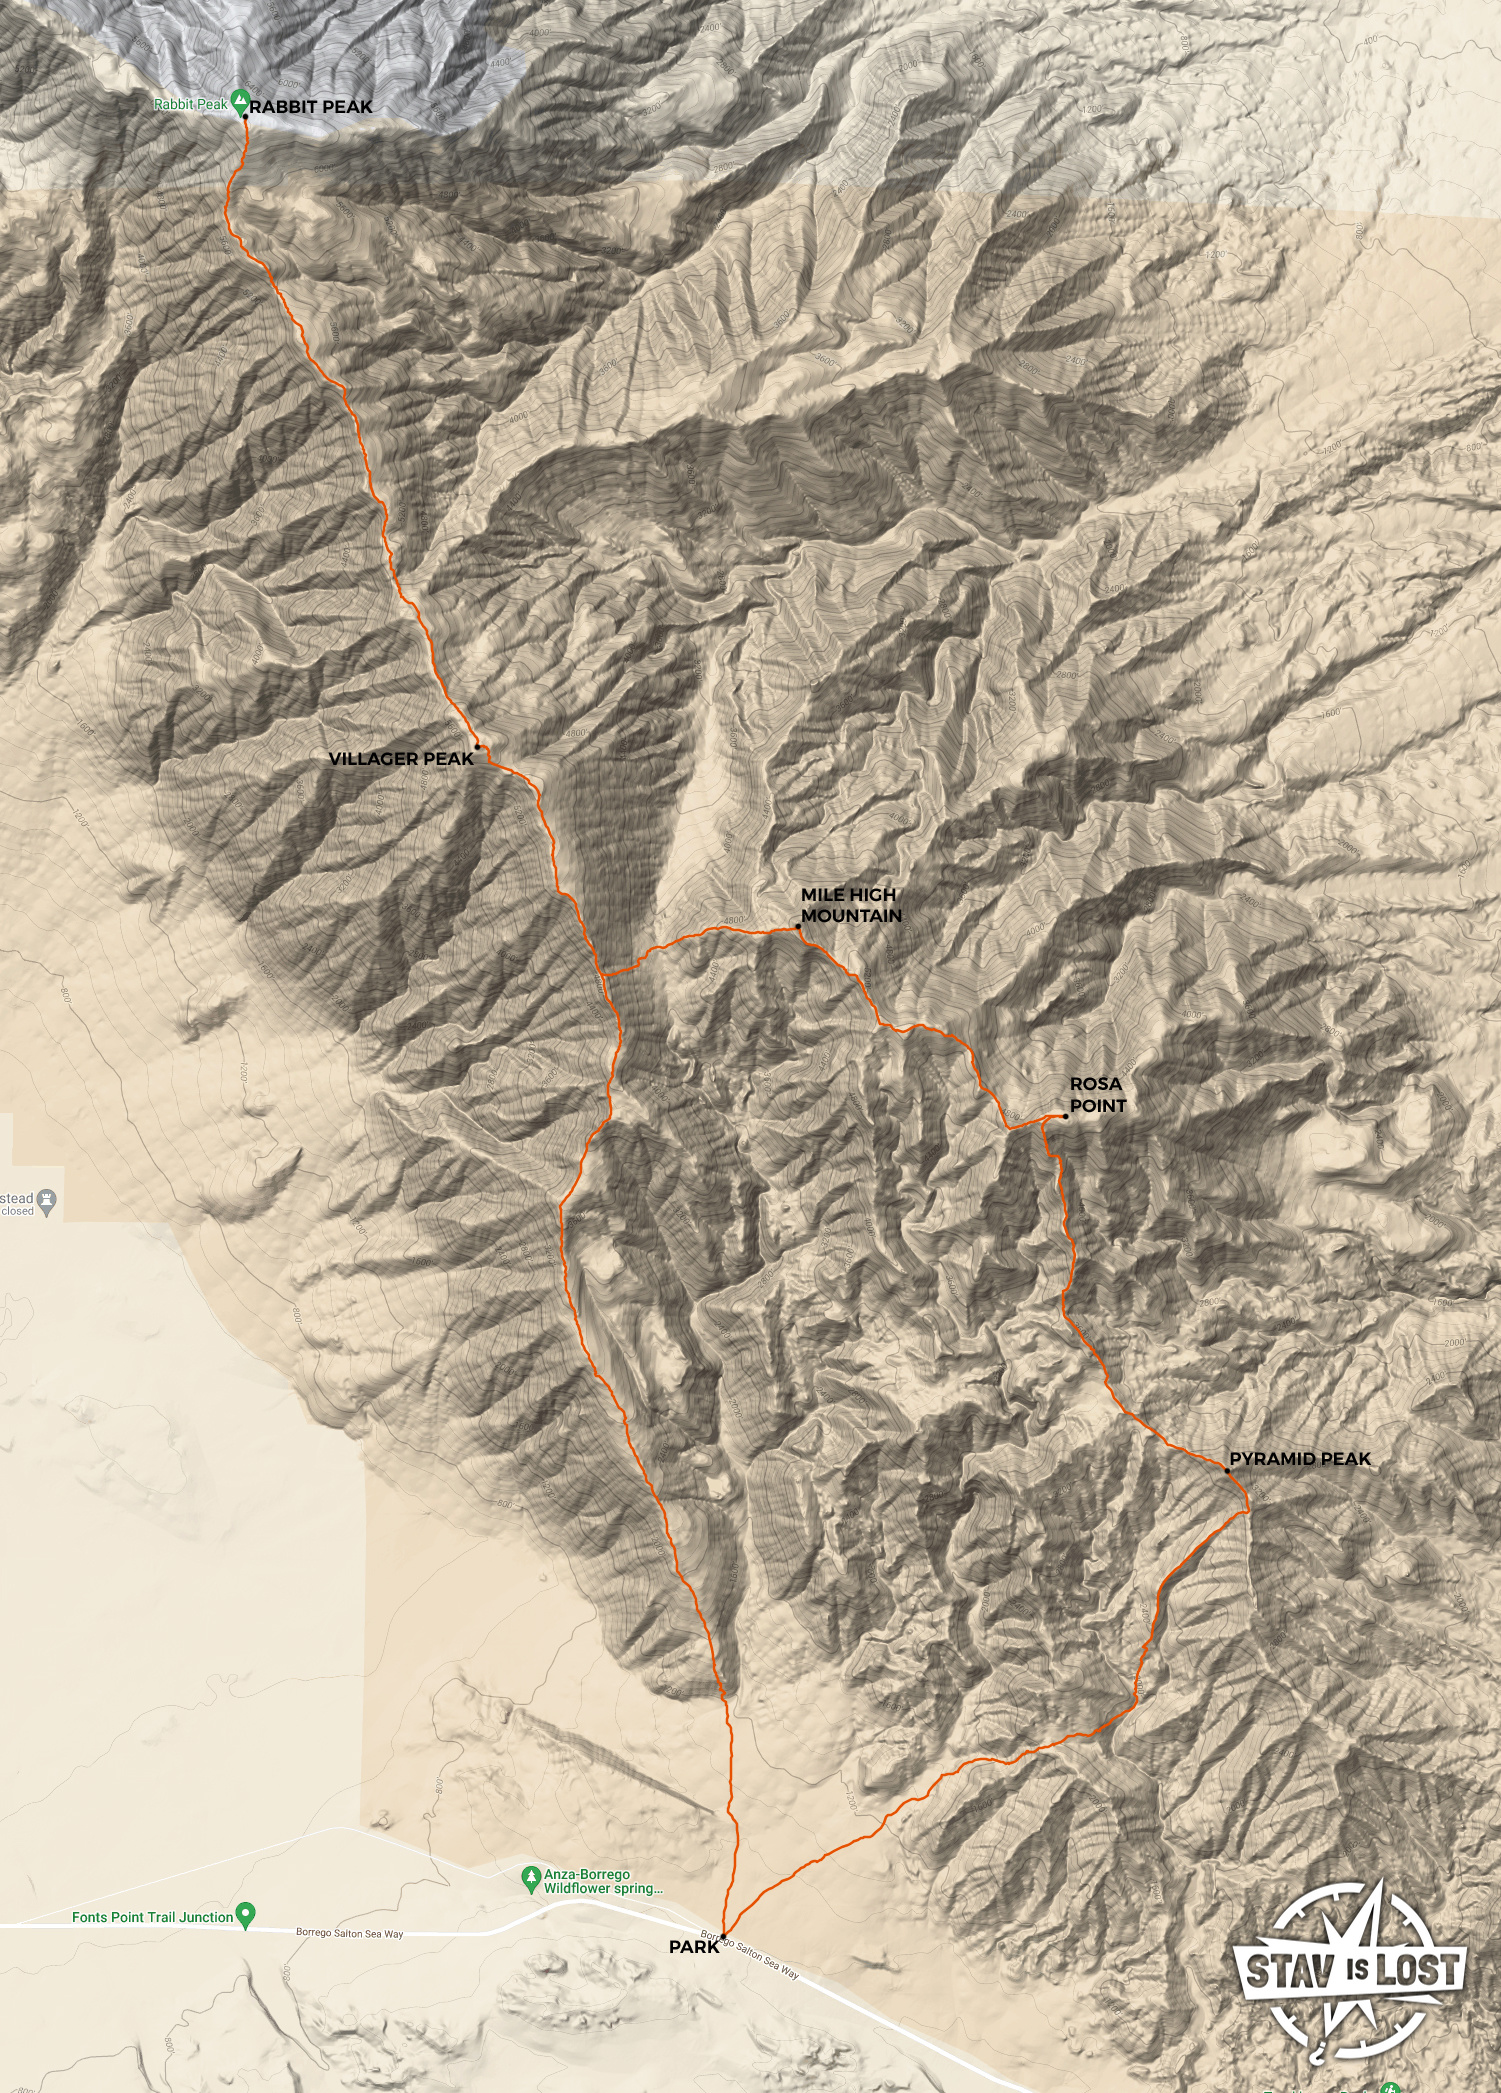 map for Rabbit Peak, Mile High Mountain, Rosa Point, Pyramid Peak by stav is lost